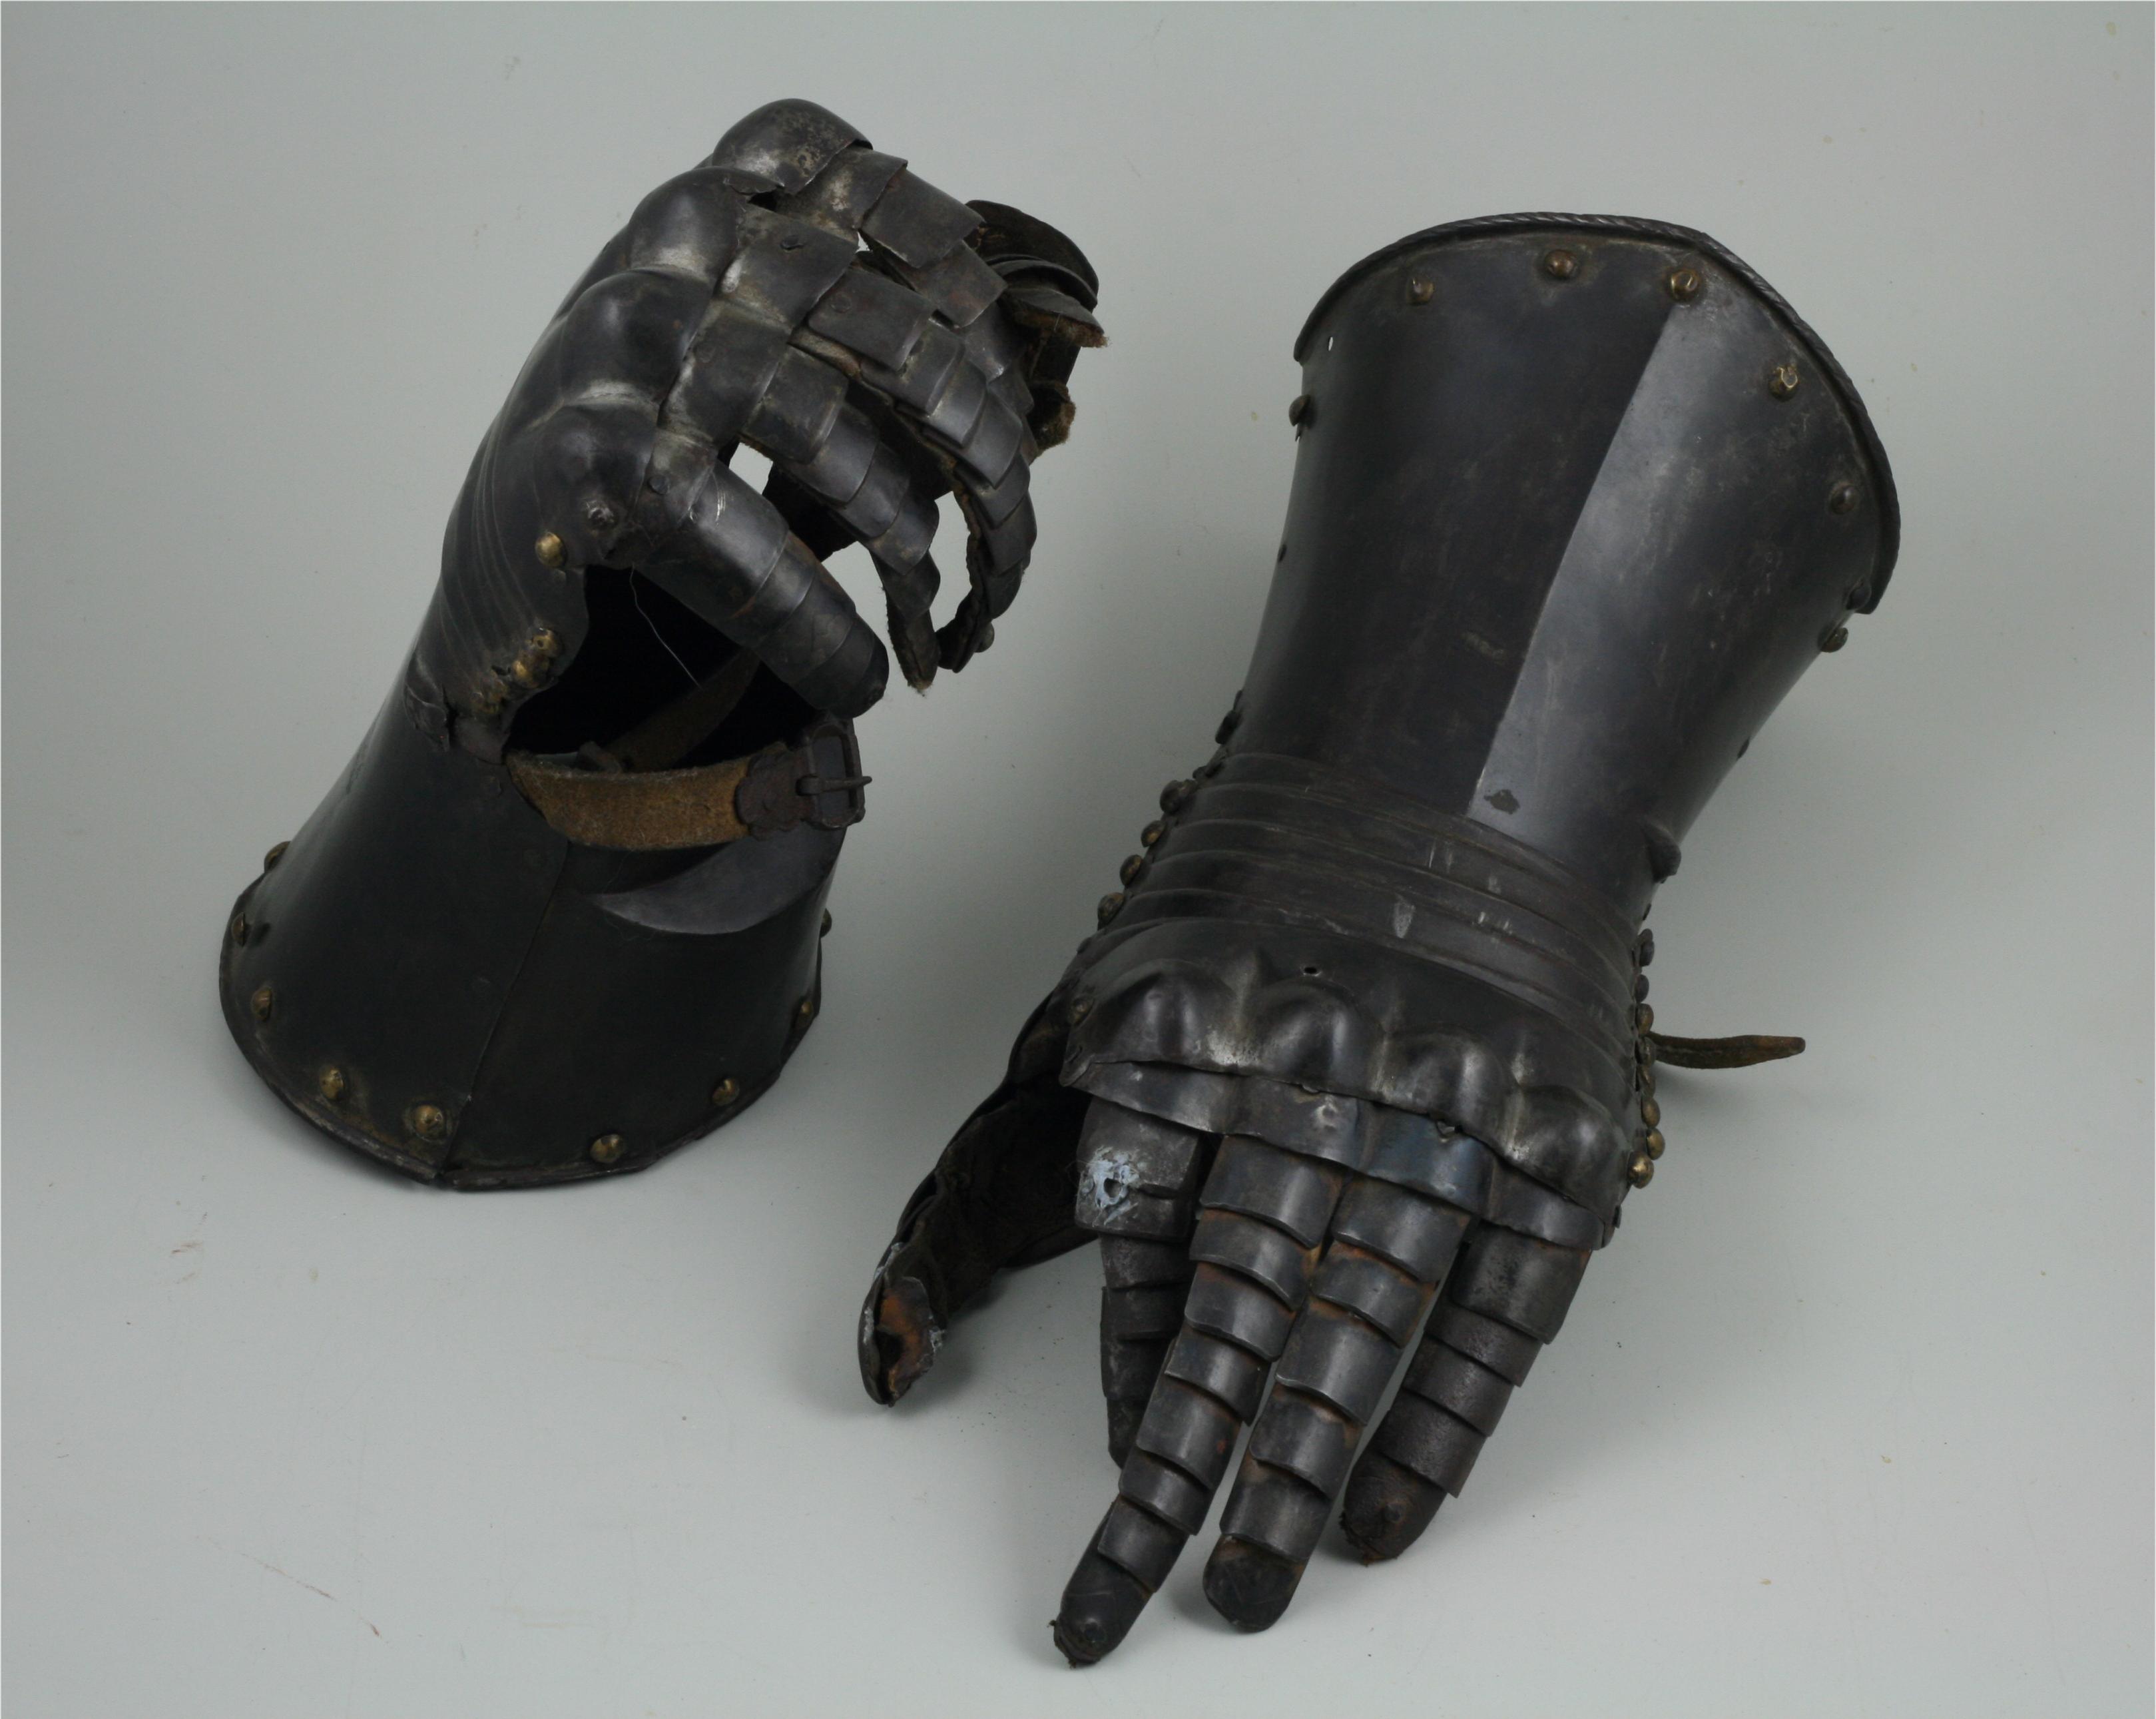 Pair of finger gauntlets. - A-121-OneUpOneDown